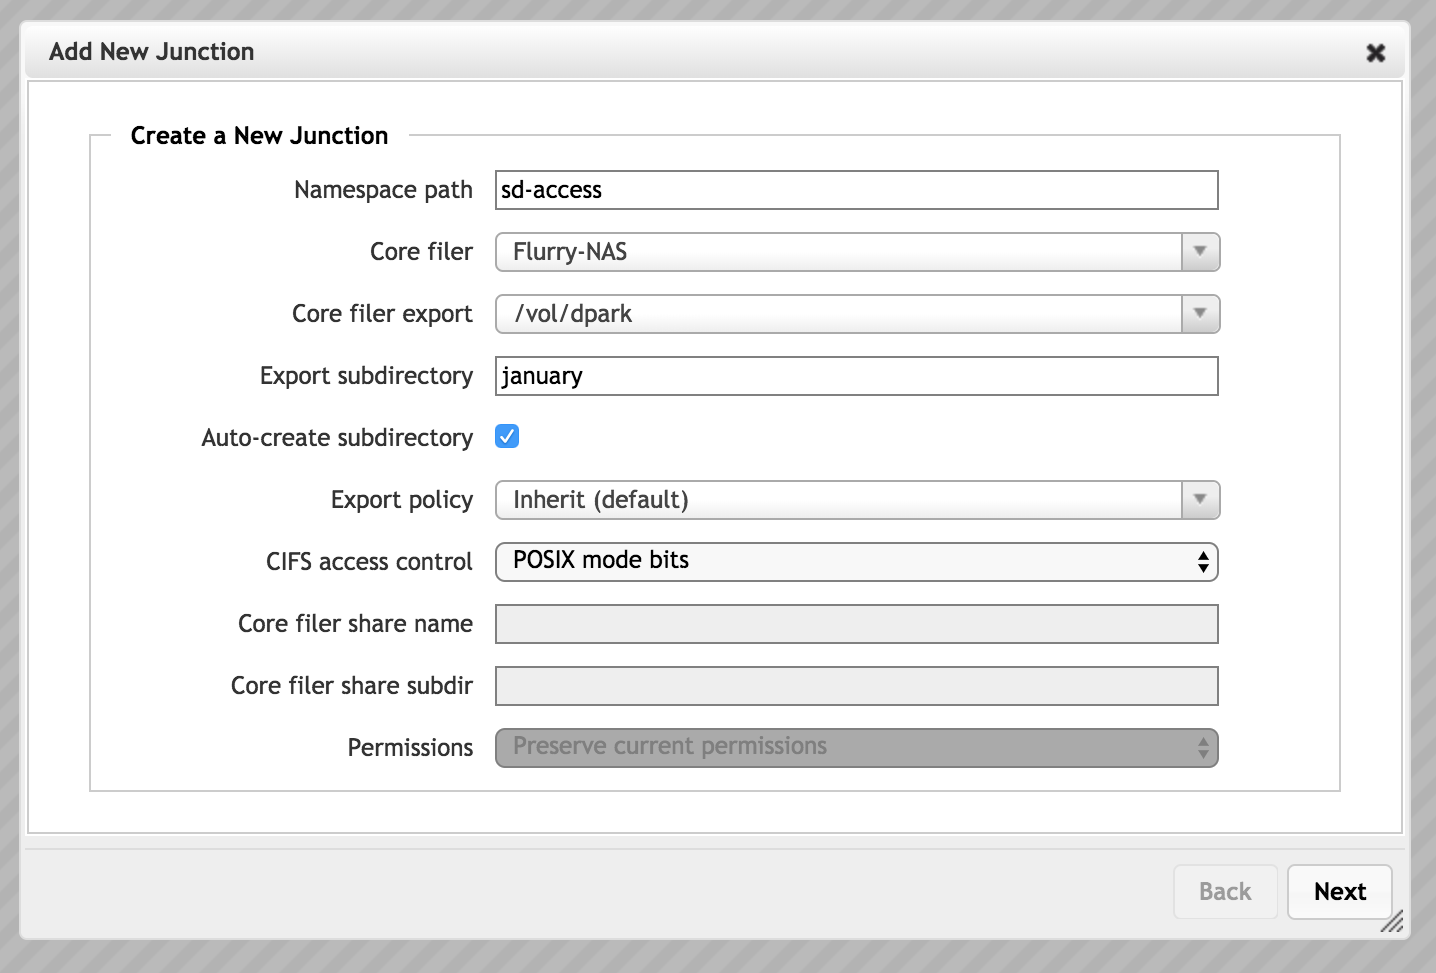 Add New Junction wizard page with settings filled in